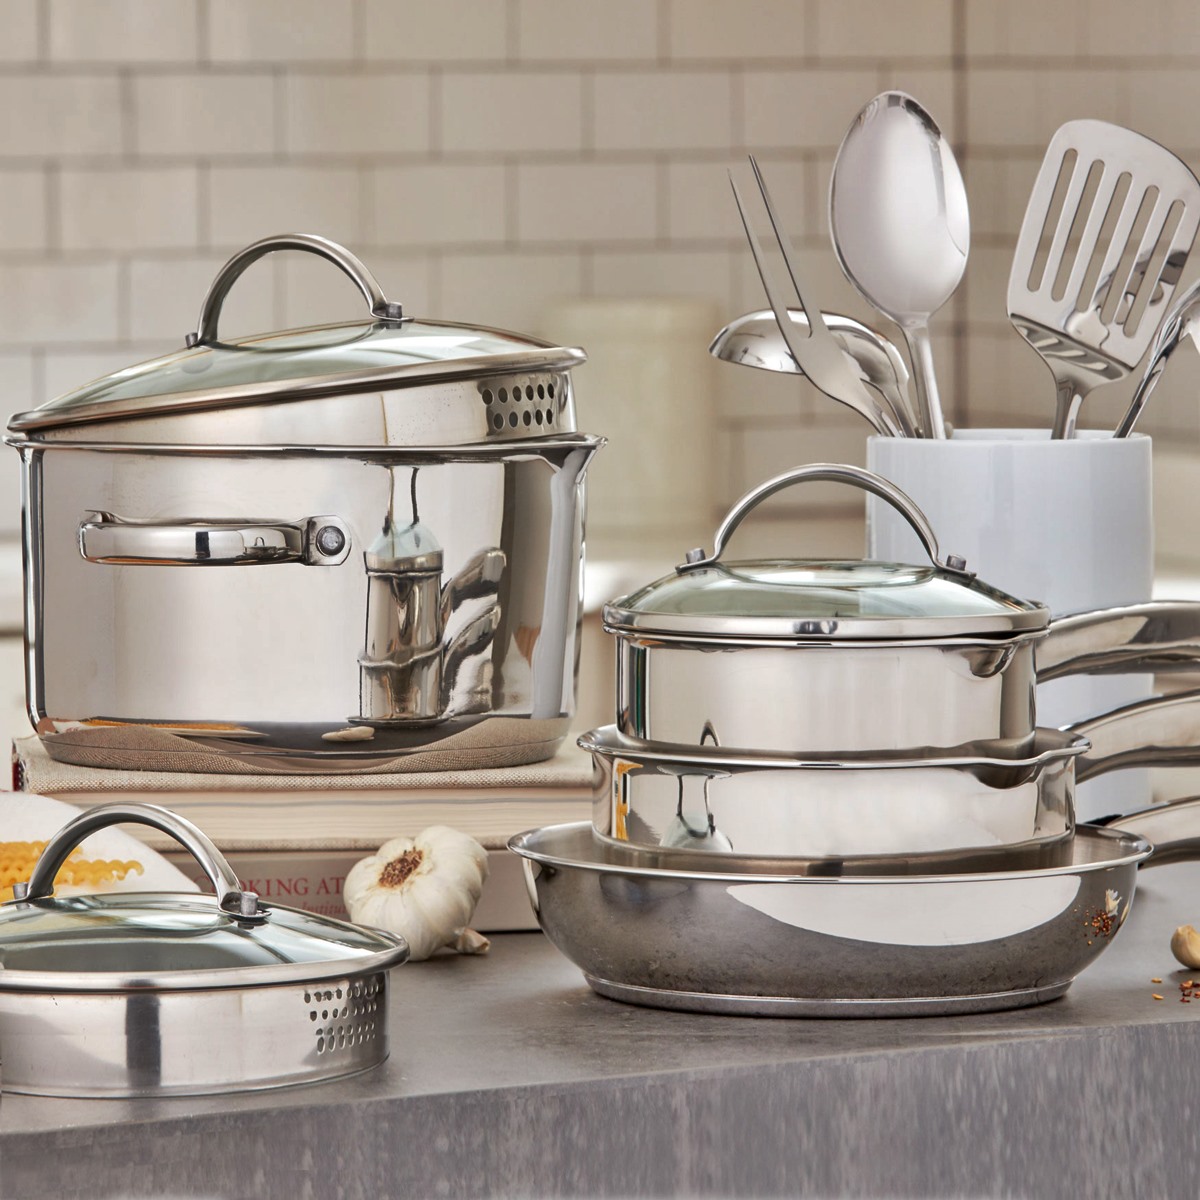 what-cookware-is-safe-for-metal-utensils-choosing-durability-and-resistance-in-the-kitchen